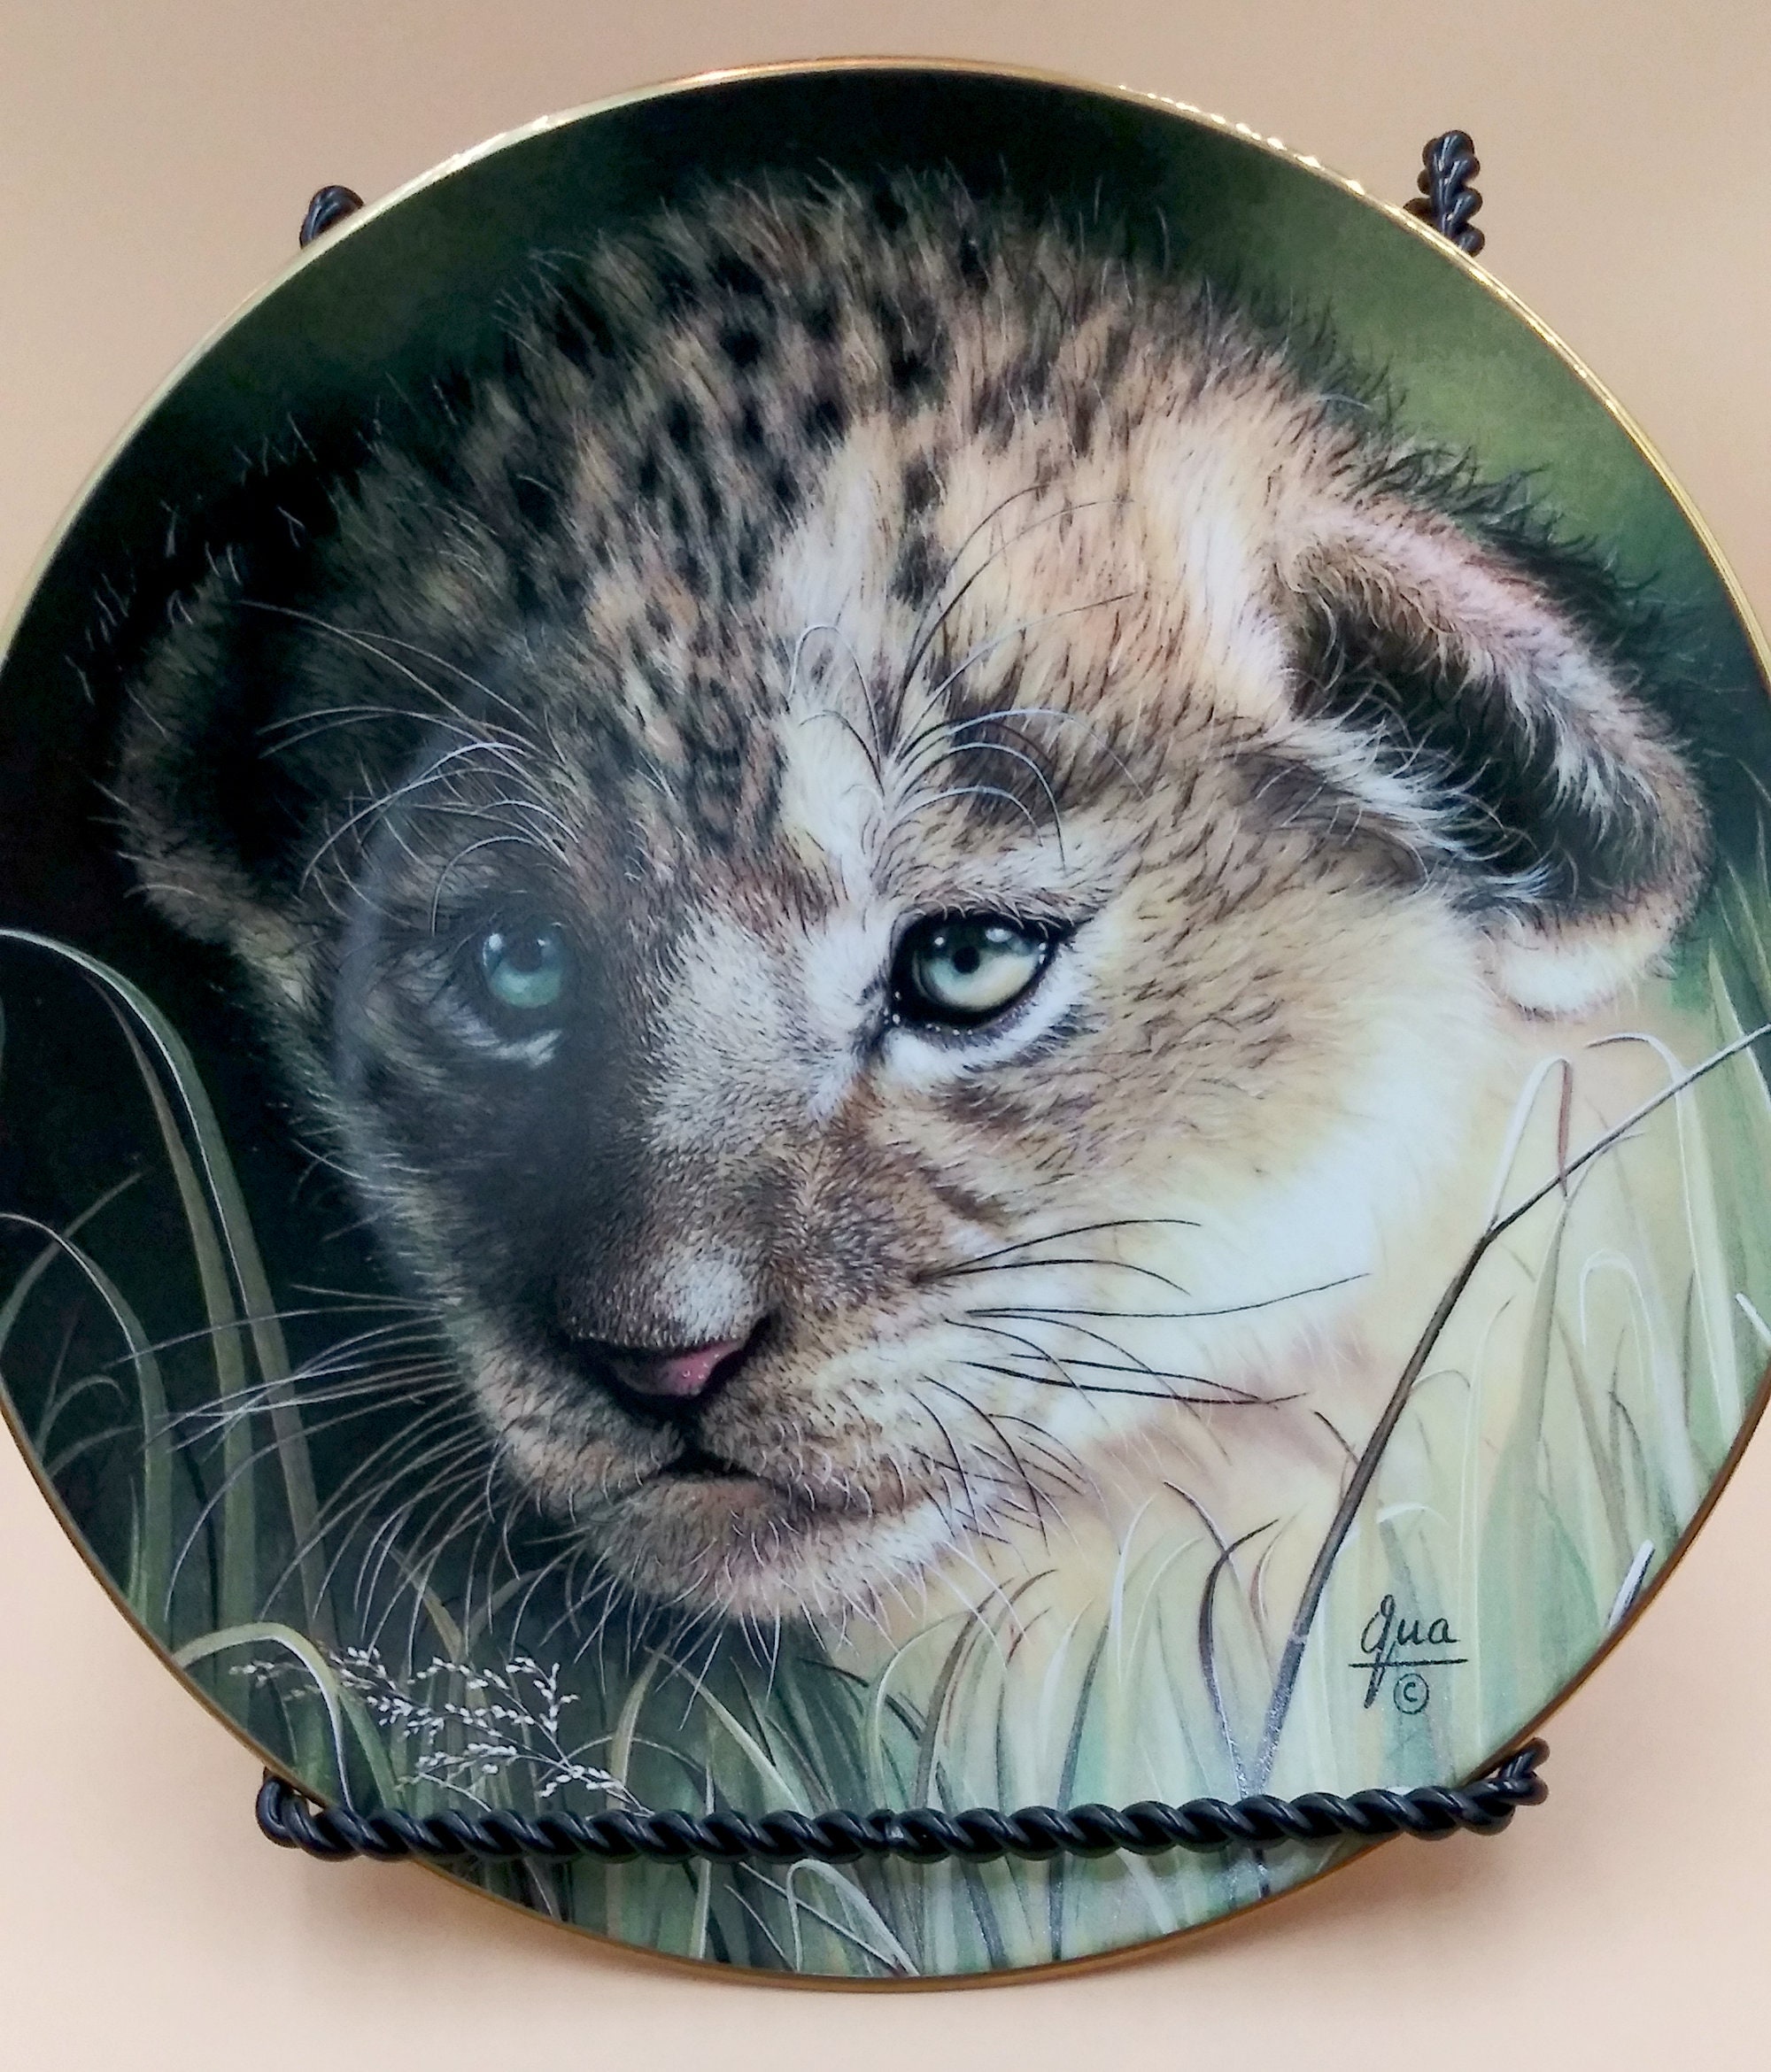 Buy Cubs Of The Big Cats Plate Collection Lion Cub By Gua Signed Princeton Gallery Fine